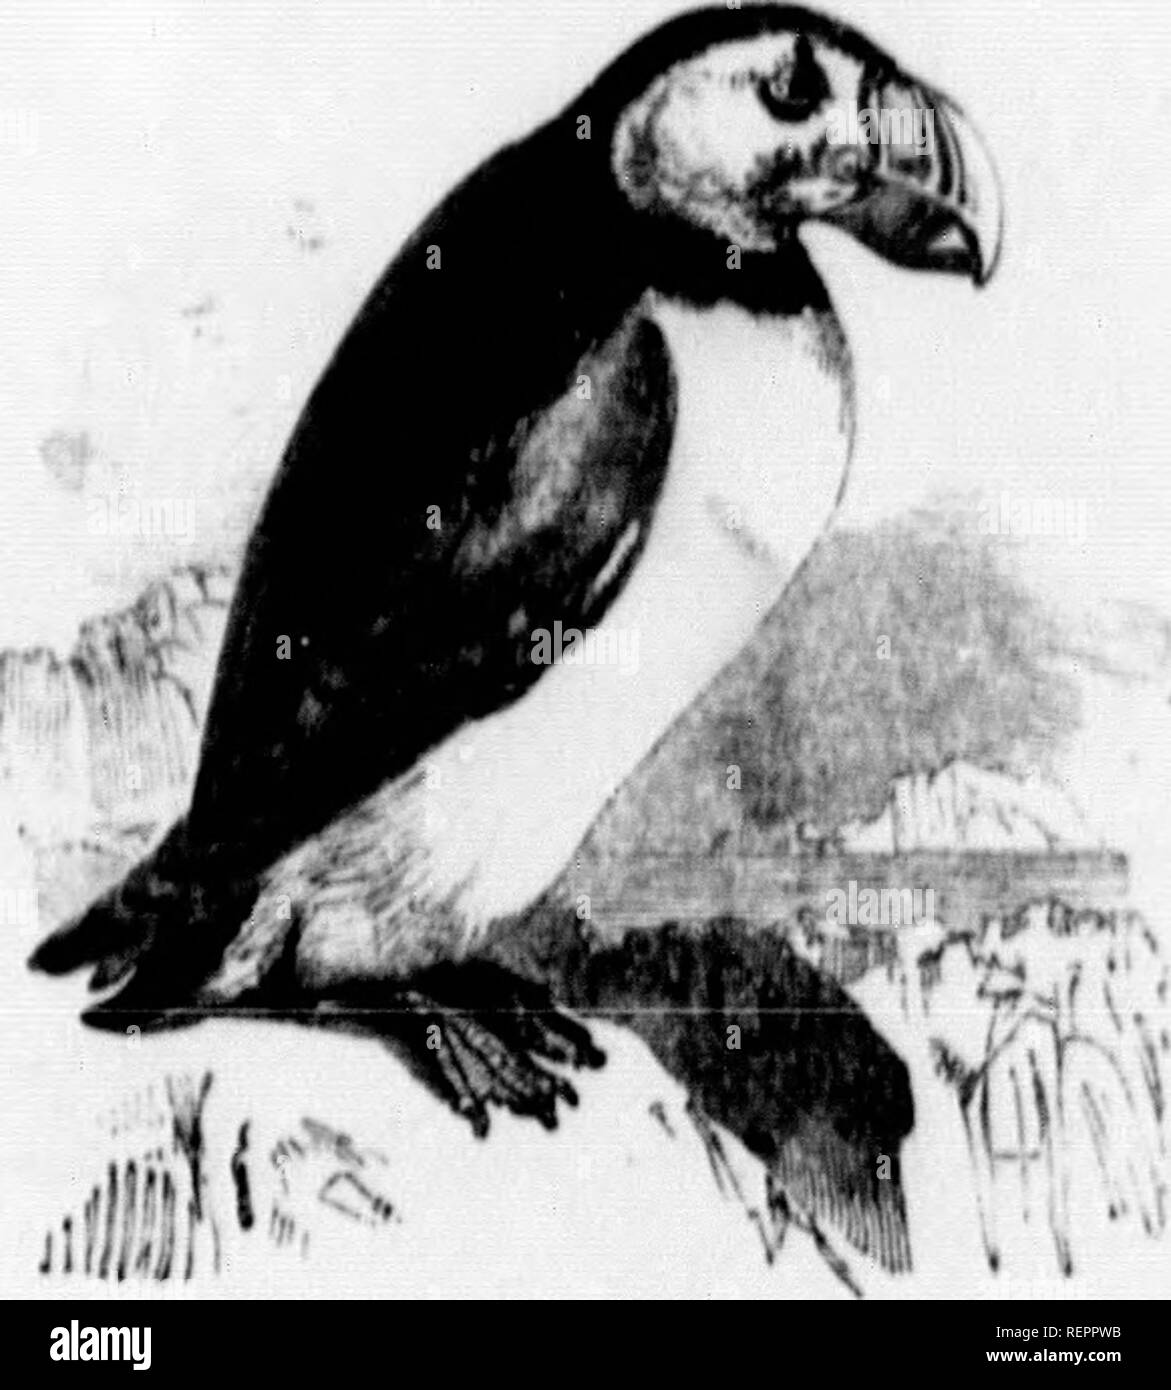 . The illustrated natural history [microform]. Natural history; Sciences naturelles. »0H NATURAL HIBTUHT. Kaiiiily III. Alctdro. Mub-family a. Alcina. FnATEncCtA.—(Lut.). ArotTca (Lut. Arctic), the Pvffin. The Puffin is common .at the Noodles and the western islands of England, It forms deep hnrrows in the soil, in which ono egg is deposited, or usuqjs uio bunow of a rabbit. The liolo is generally from three to fonr feet in depth, when tiie Puffin is fniced to labour for itself; it usually takes a winding course ; and the inhabitant is secured from surprise by fonning two entrances, in order t Stock Photo